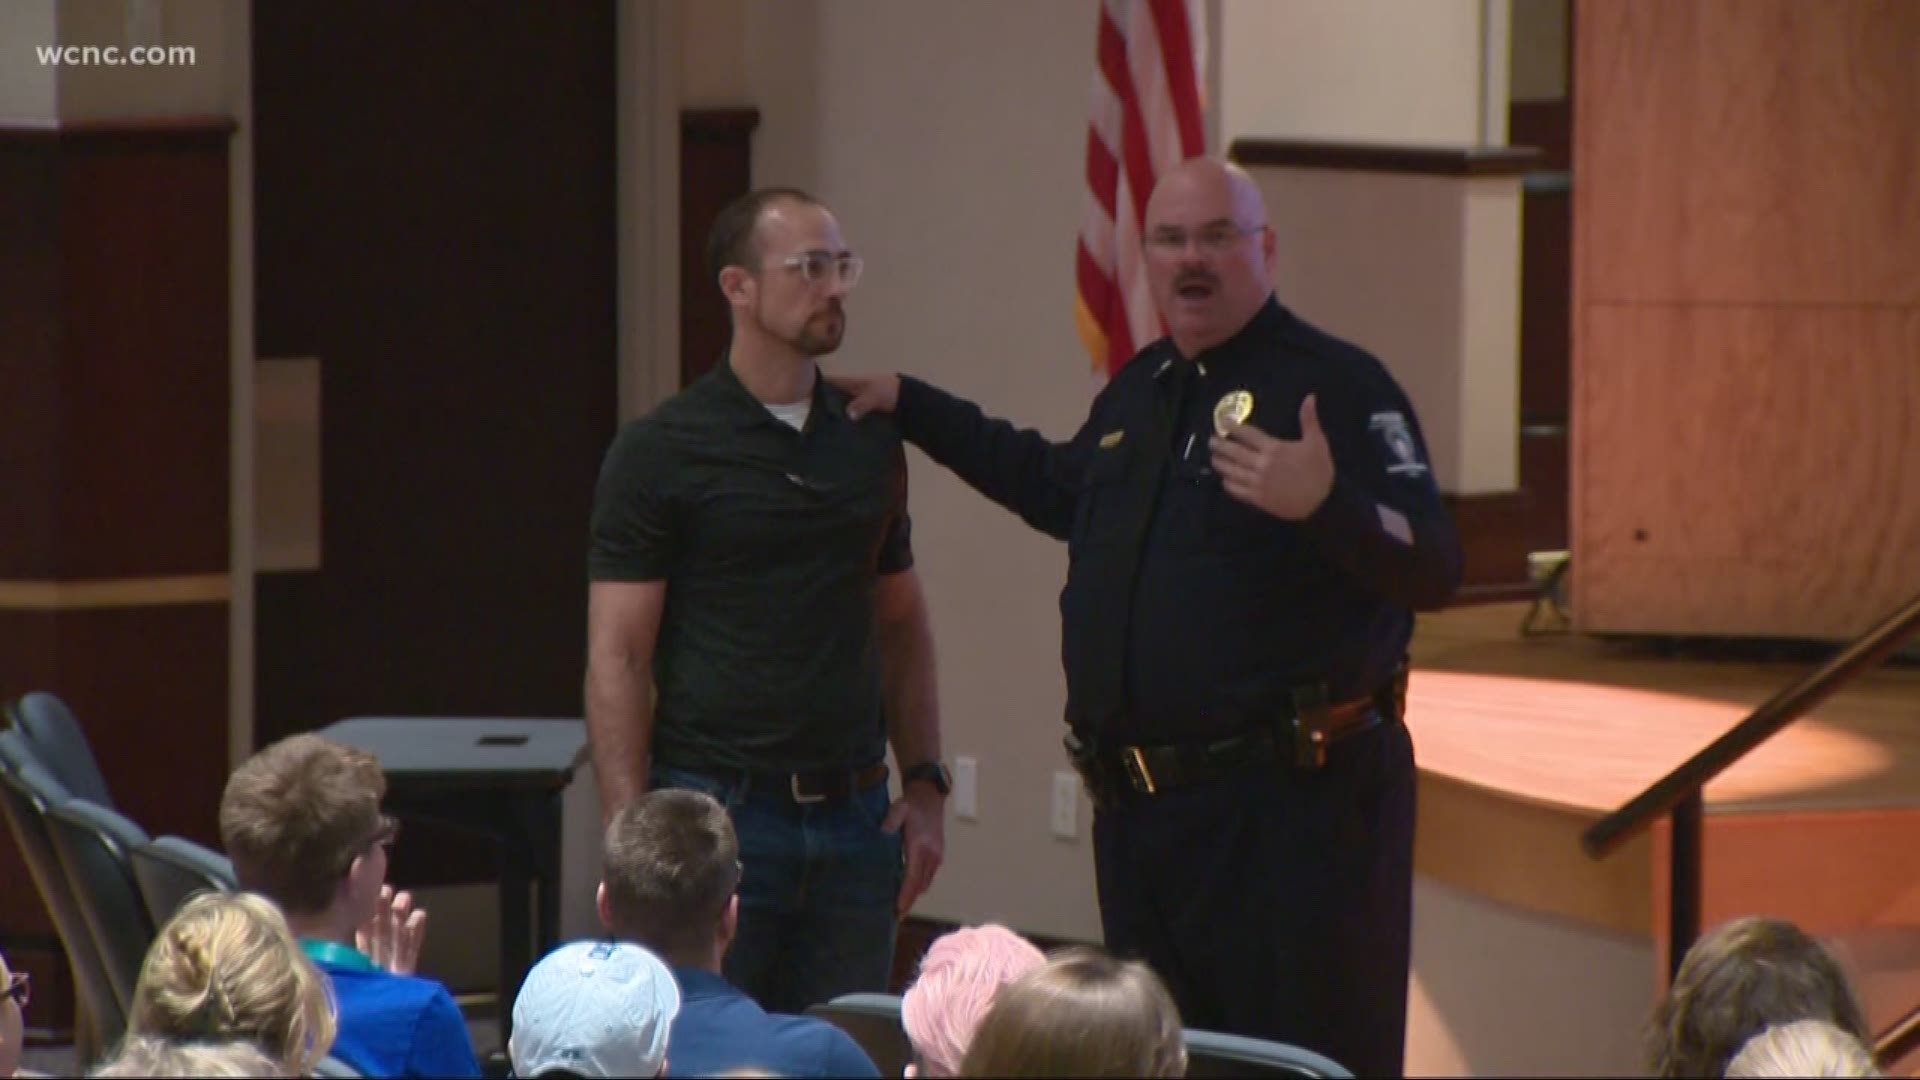 Dozens of people packed a room at the Police & Fire Training Academy in southwest Charlotte, learning a few simple steps to stay alive in a life or death situation.